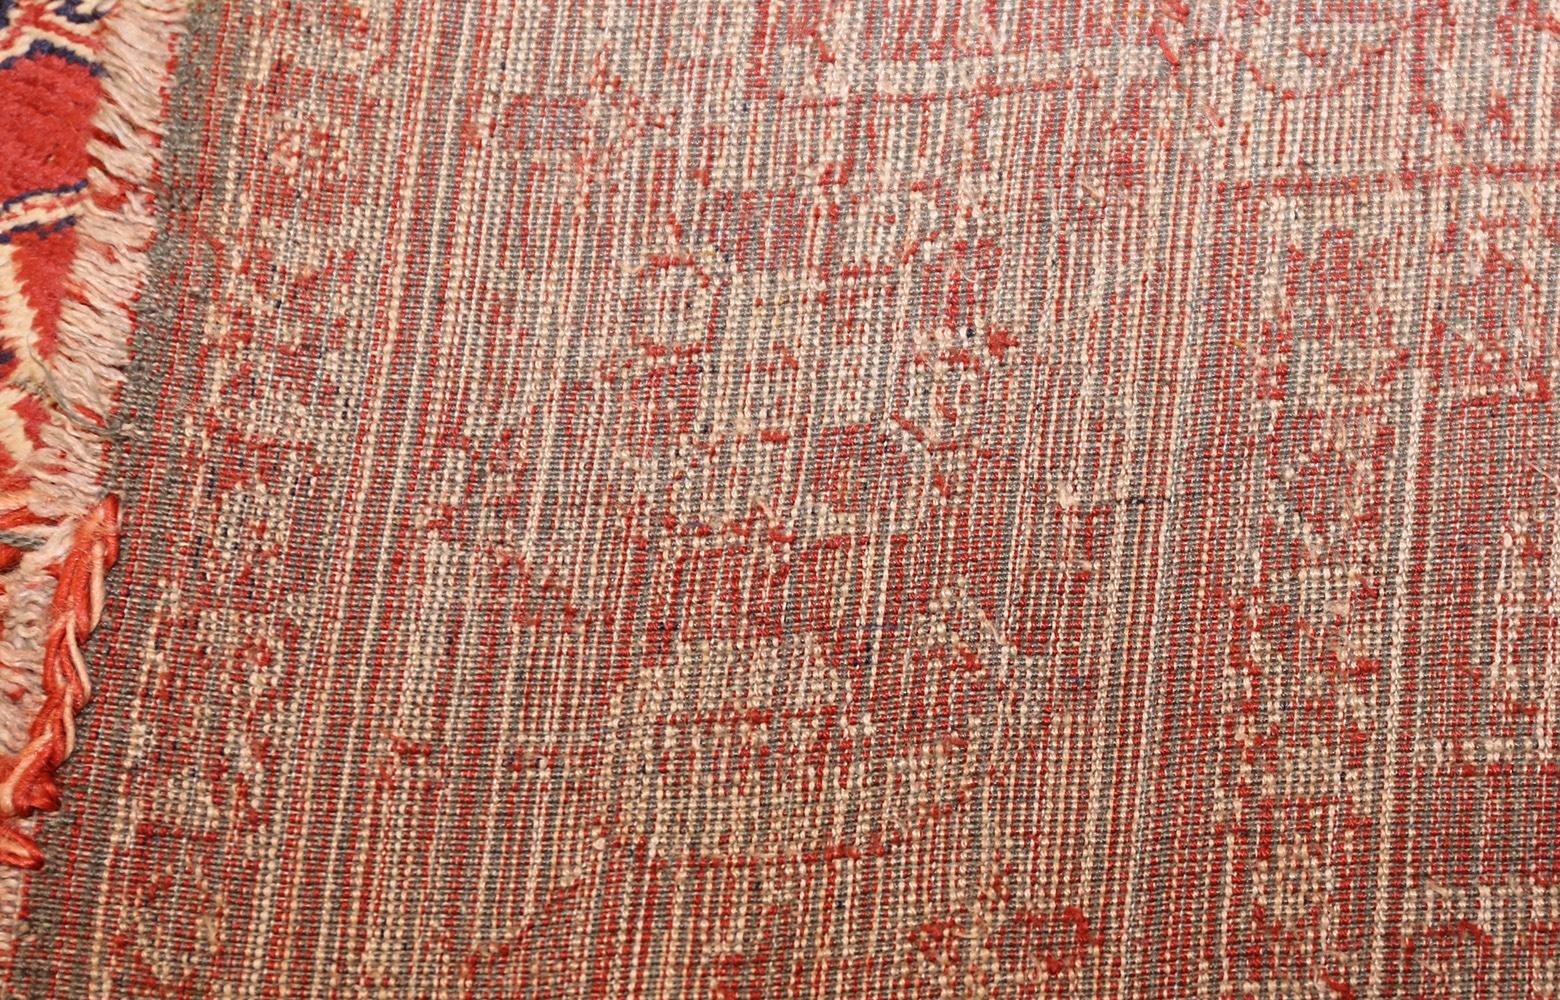 Antique American Chenille Rug. Size: 4 ft 7 in x 6 ft (1.4 m x 1.83 m) 1